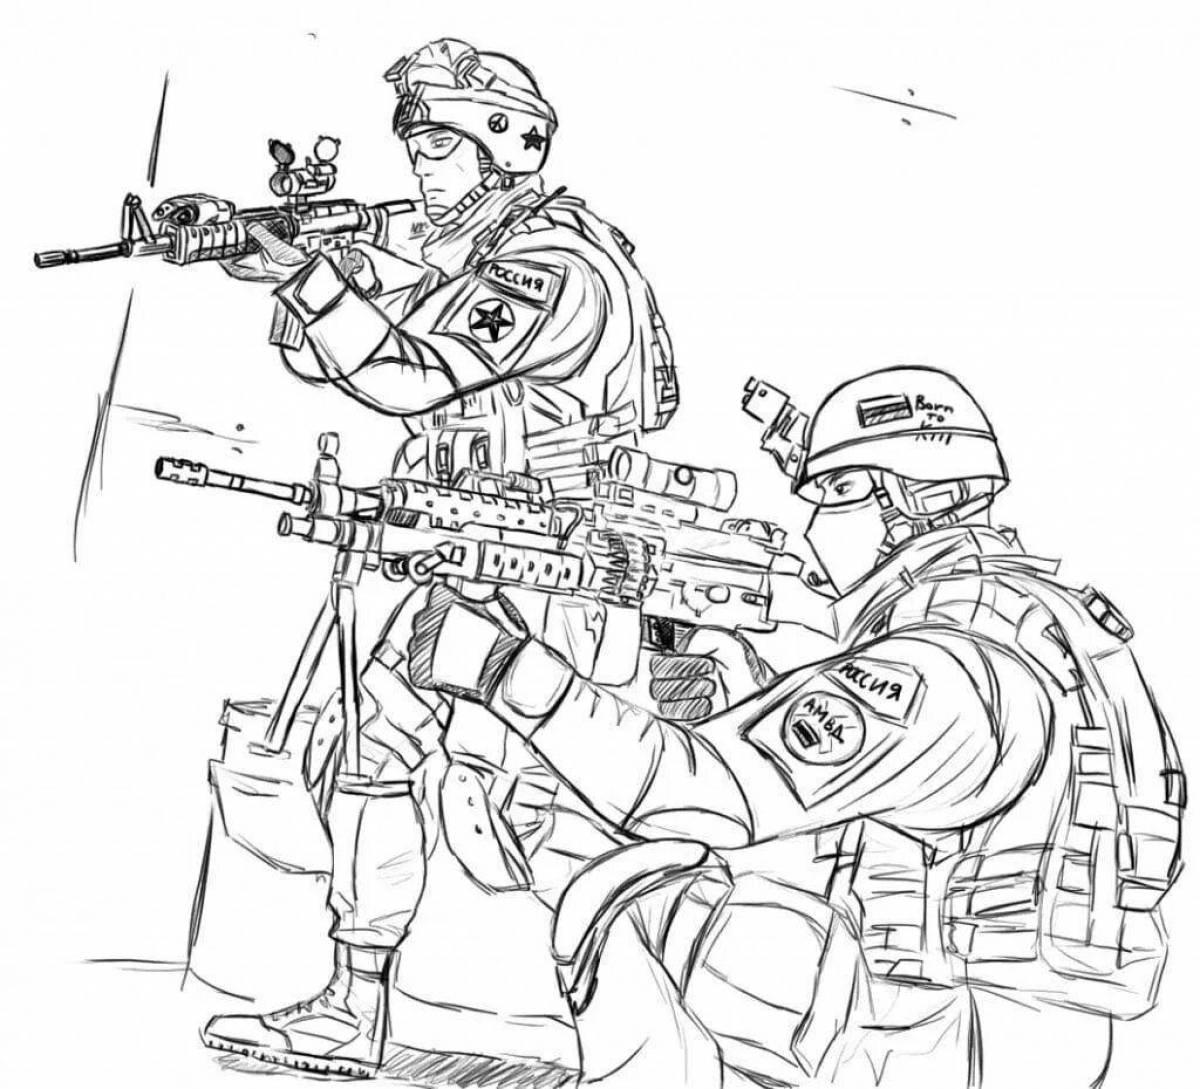 Coloring book valiant Russian soldier